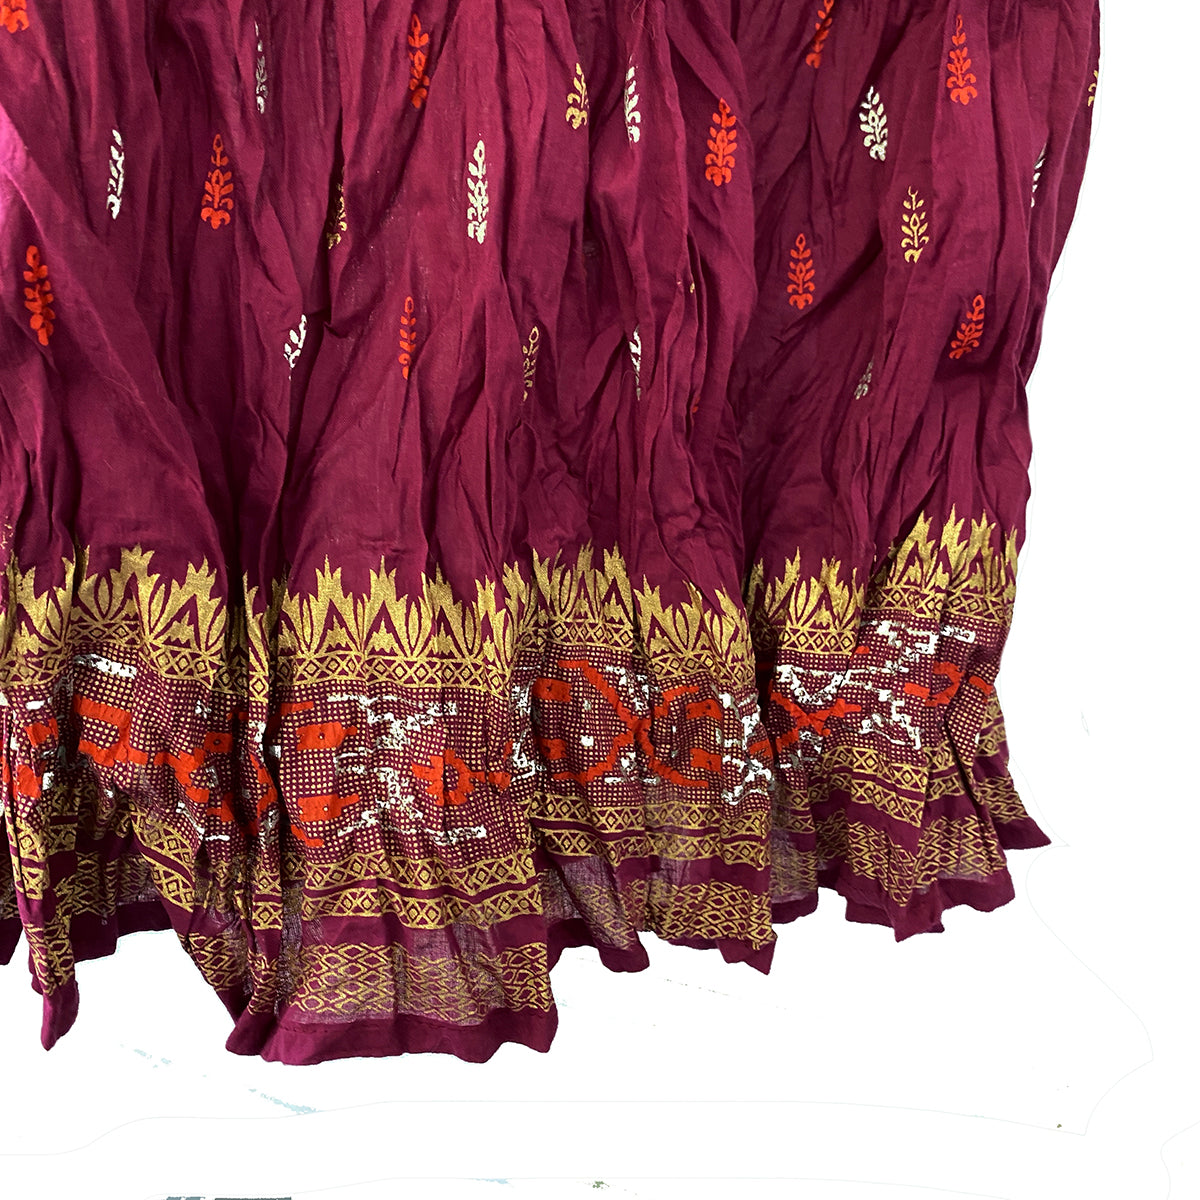 Indian Cotton Skirts-2 colors - Vintage India NYC